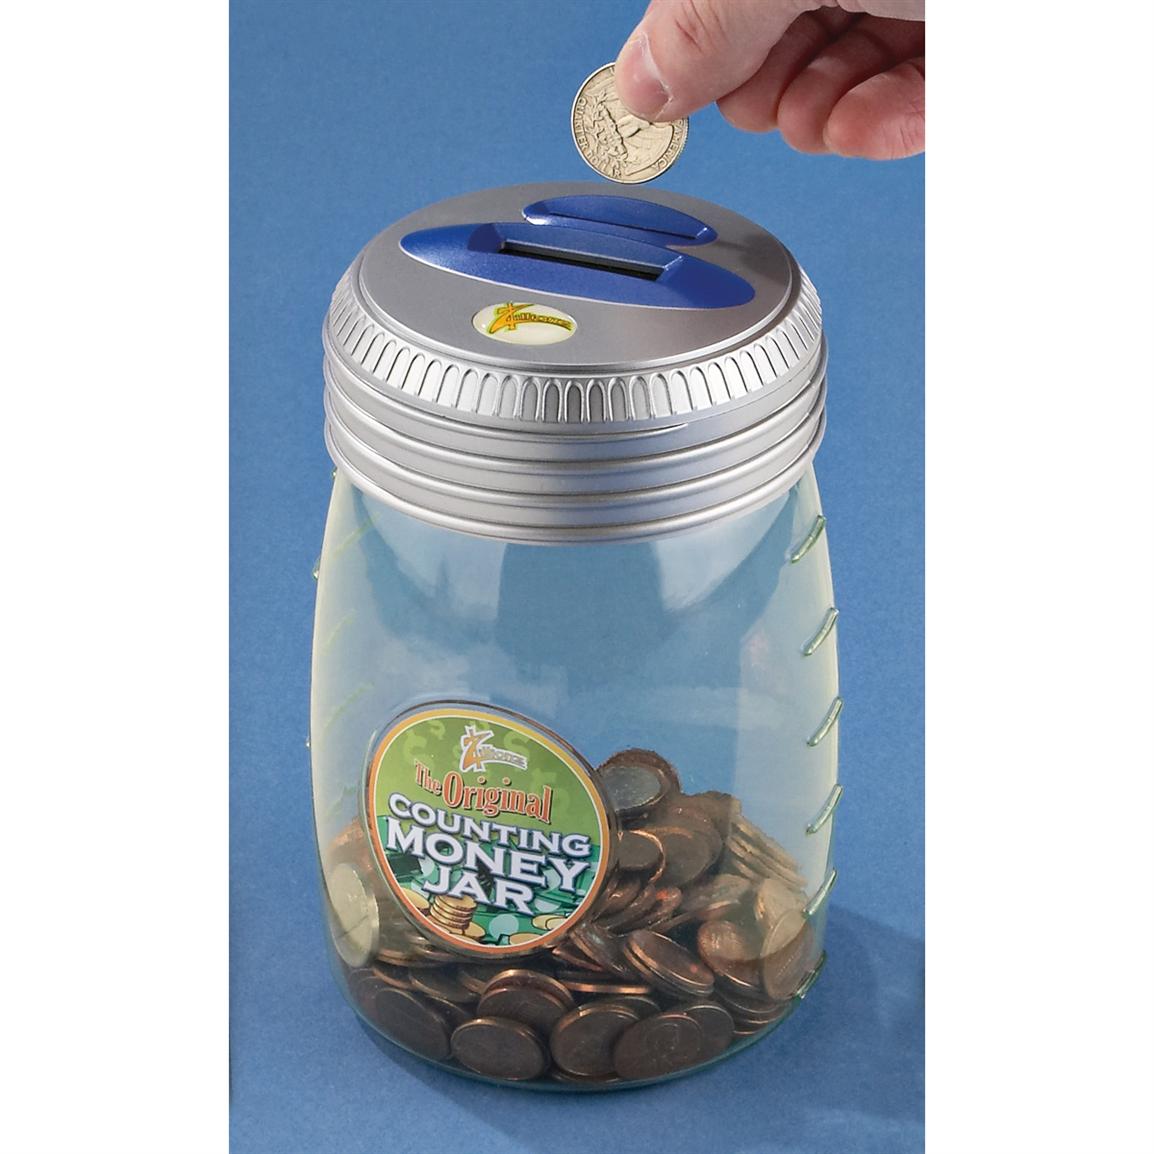 coin counting jar kmart